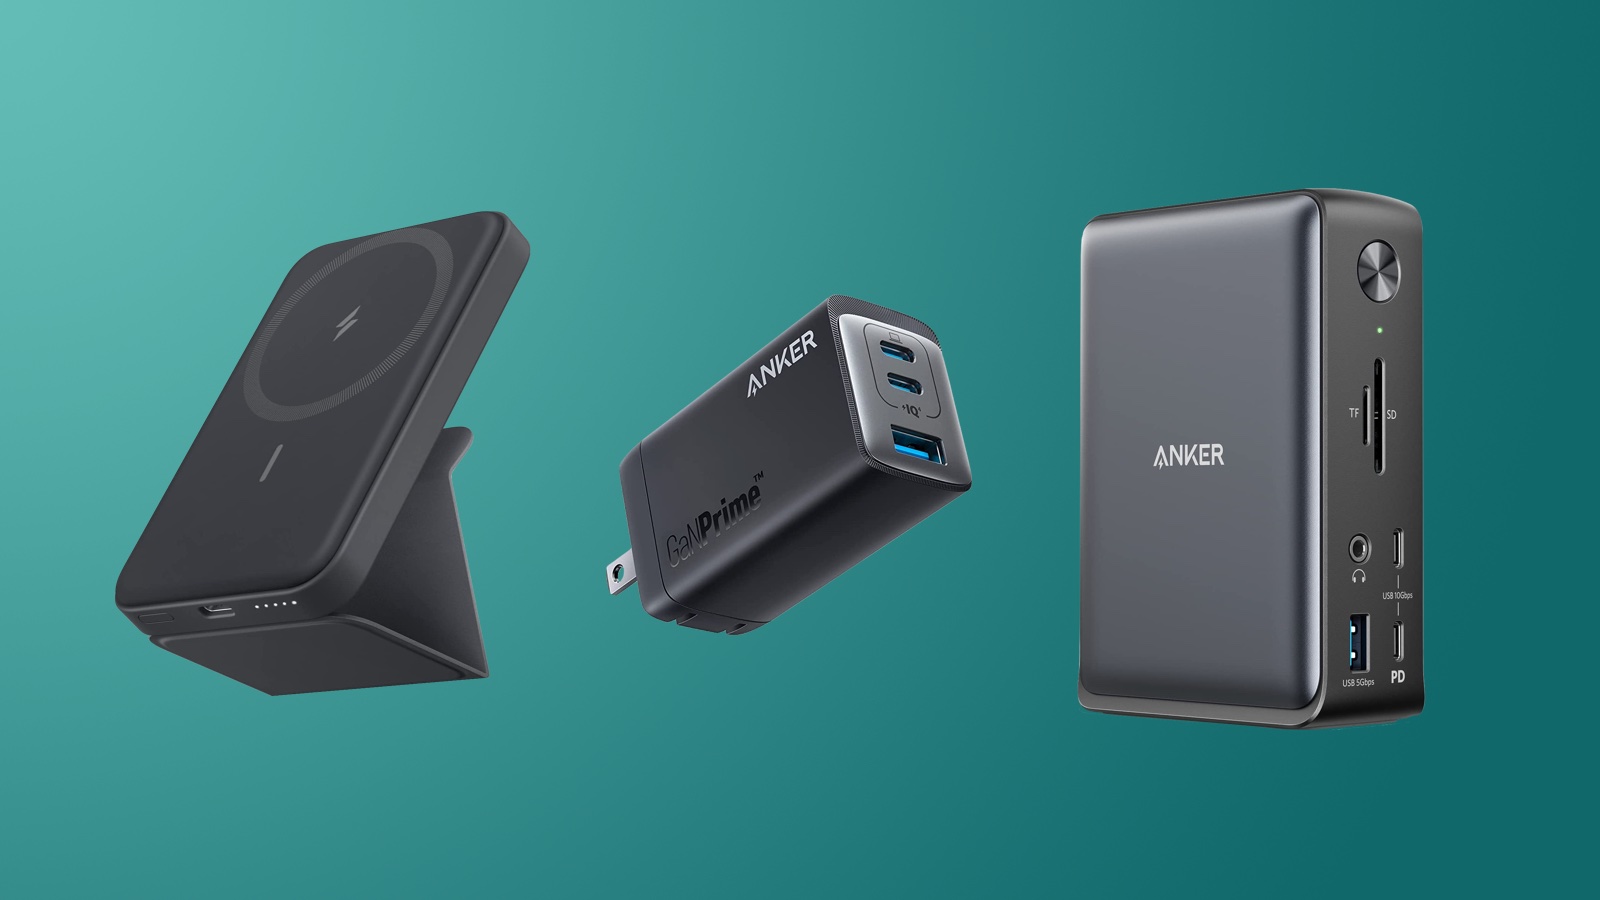 Deals: Anker and Eufy’s New Amazon Sales Have Great Discounts on USB-C Accessories, Robot Vacuums, and More